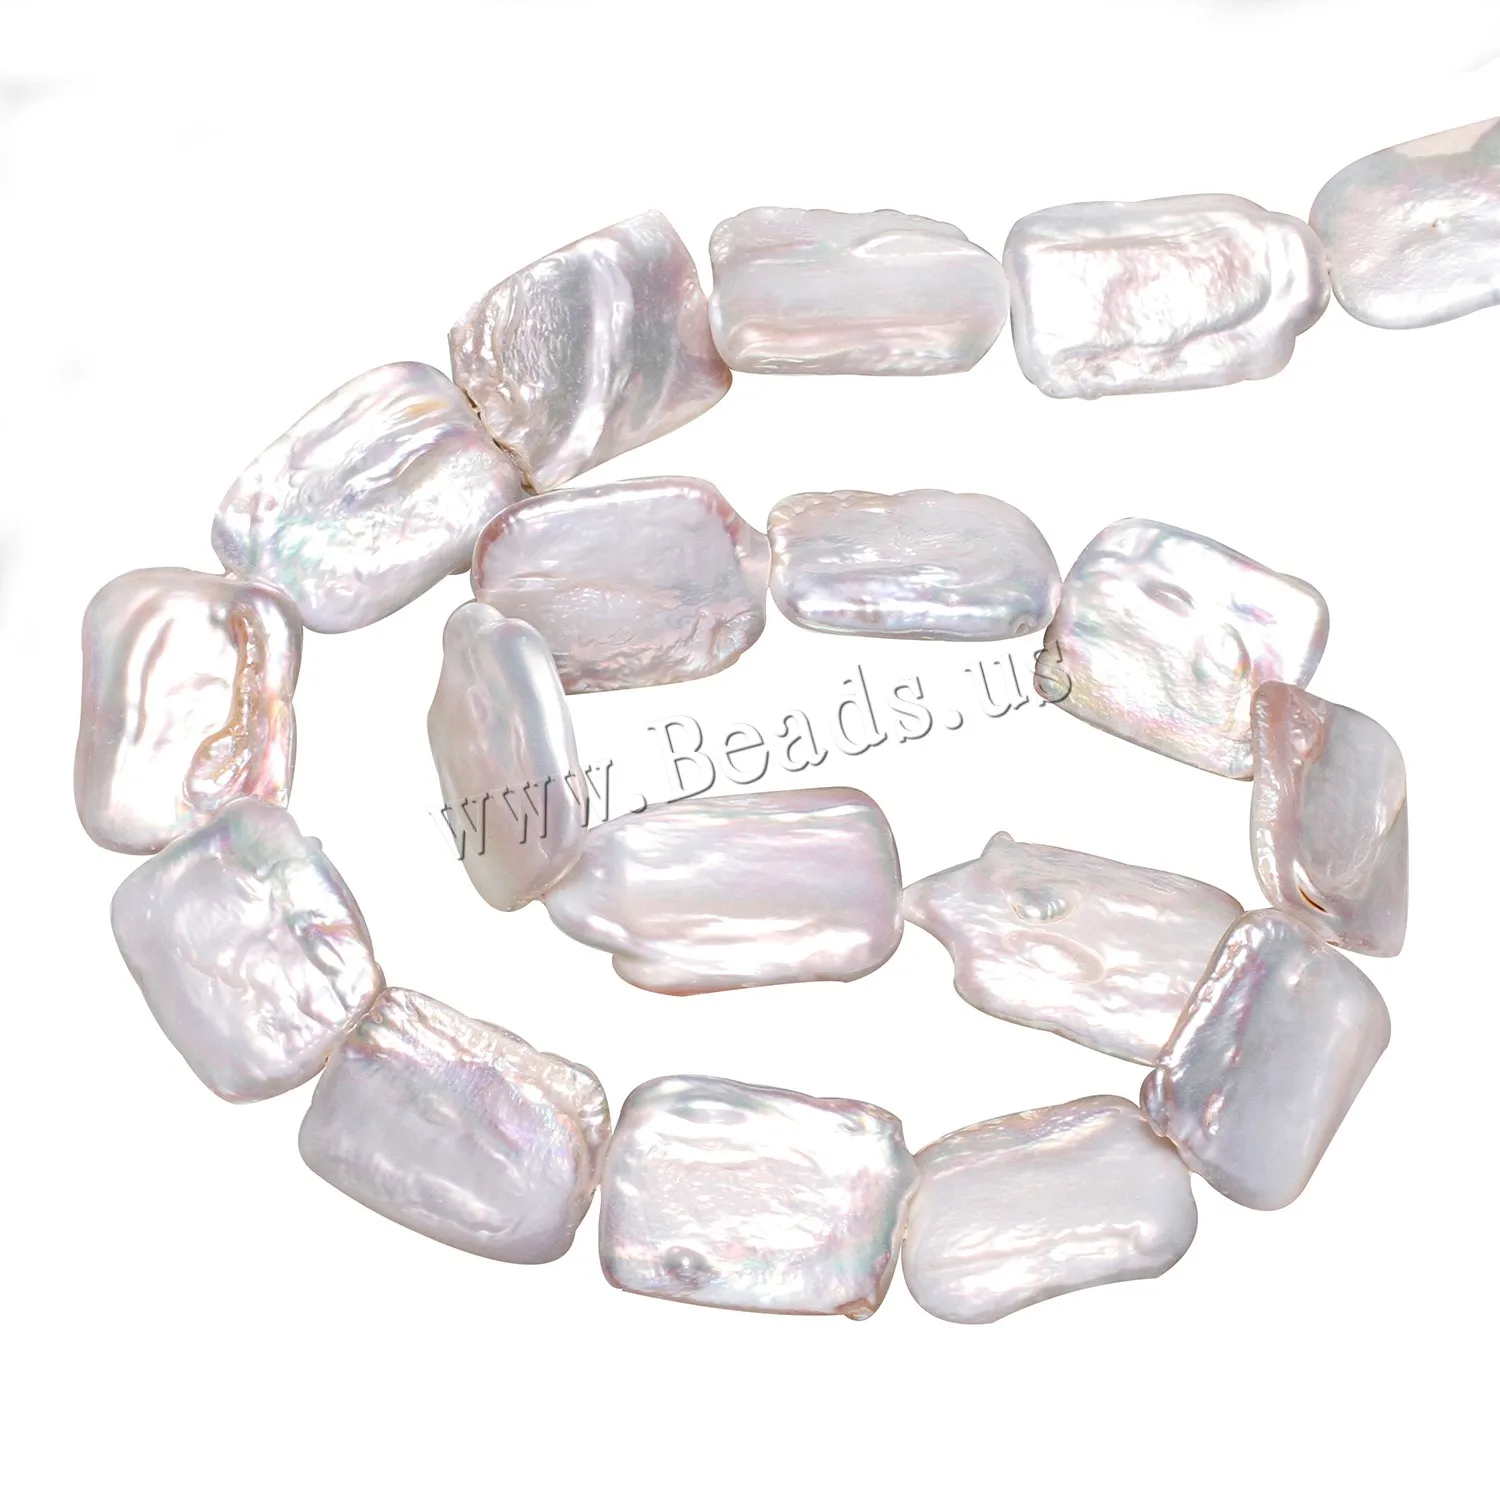 

Cultured Baroque Freshwater Pearl Beads Natural White Wholesale Pearls 15-22mm For women Jewelry Making DIY Necklace Bracelet